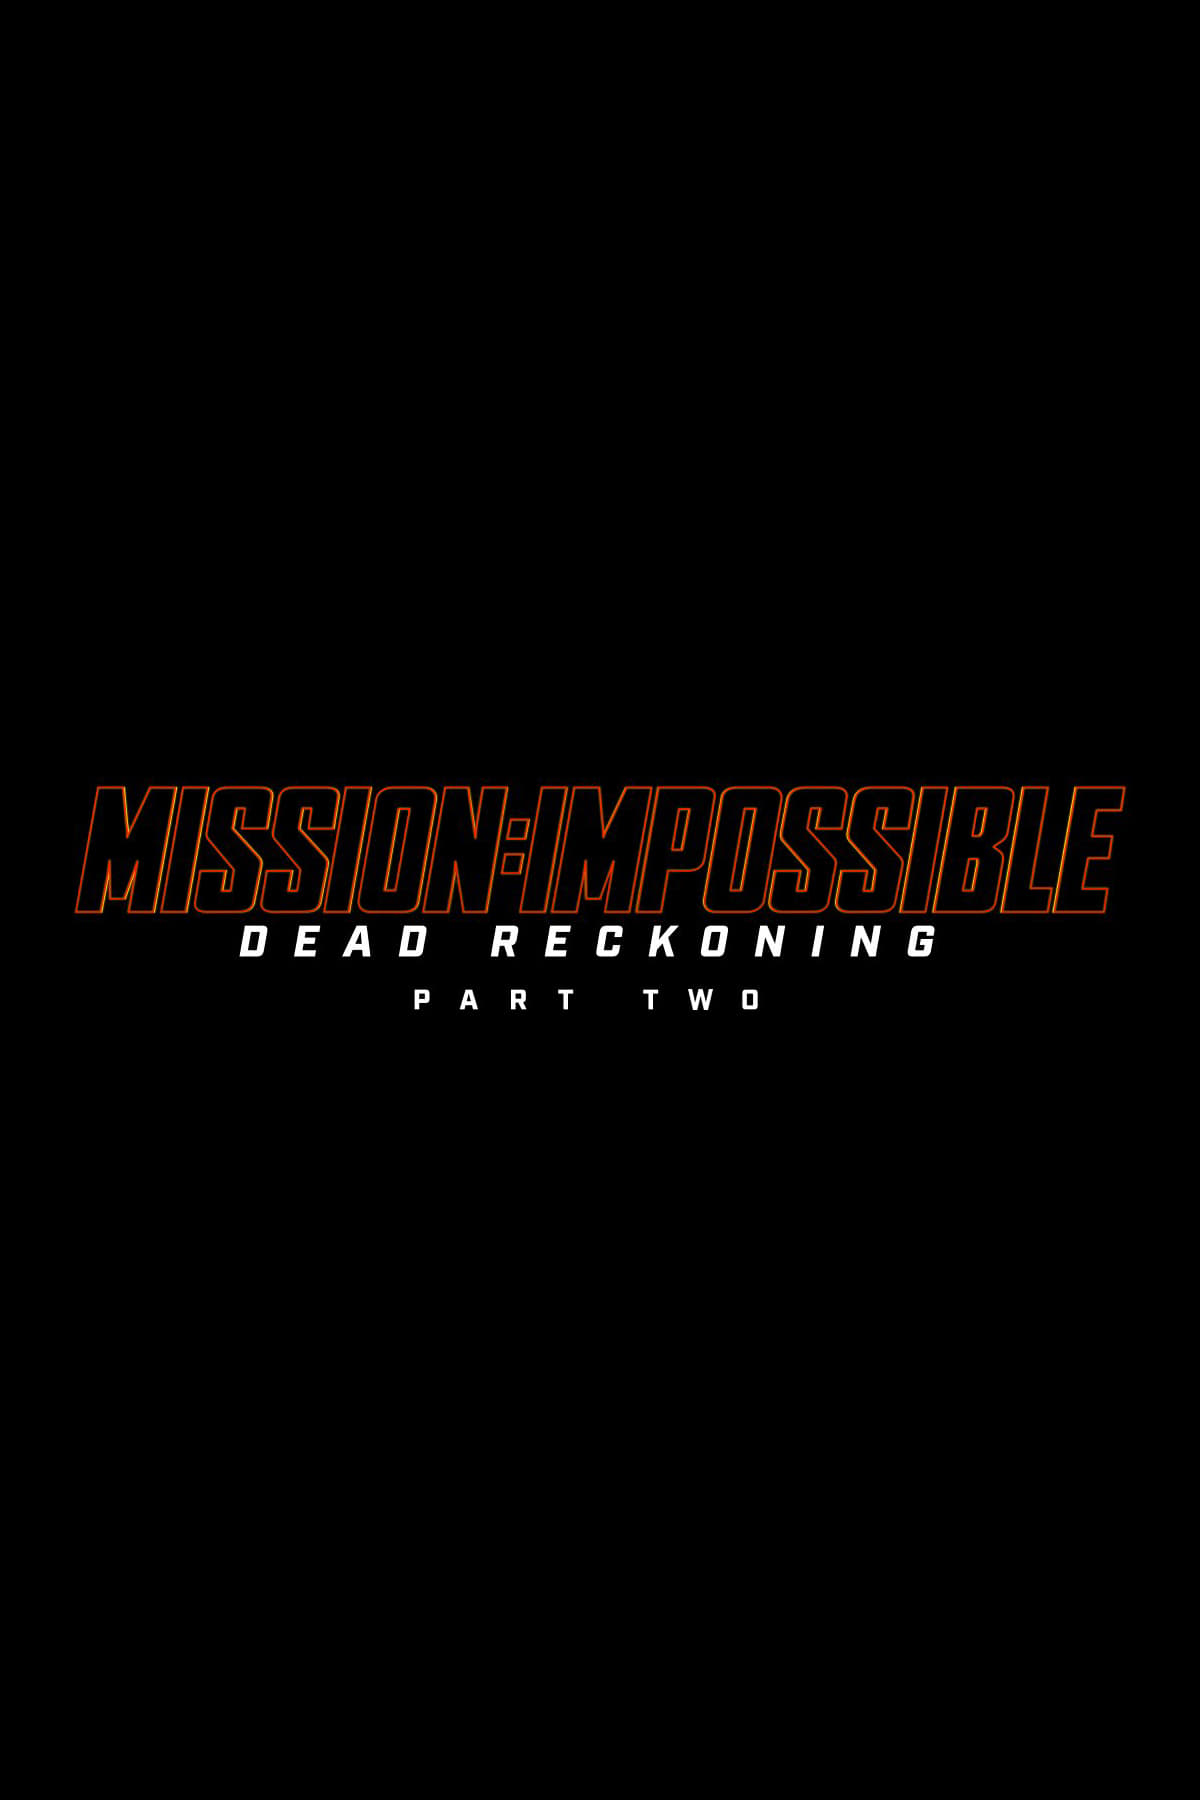 Poster for the movie "Mission: Impossible - Dead Reckoning Part Two"